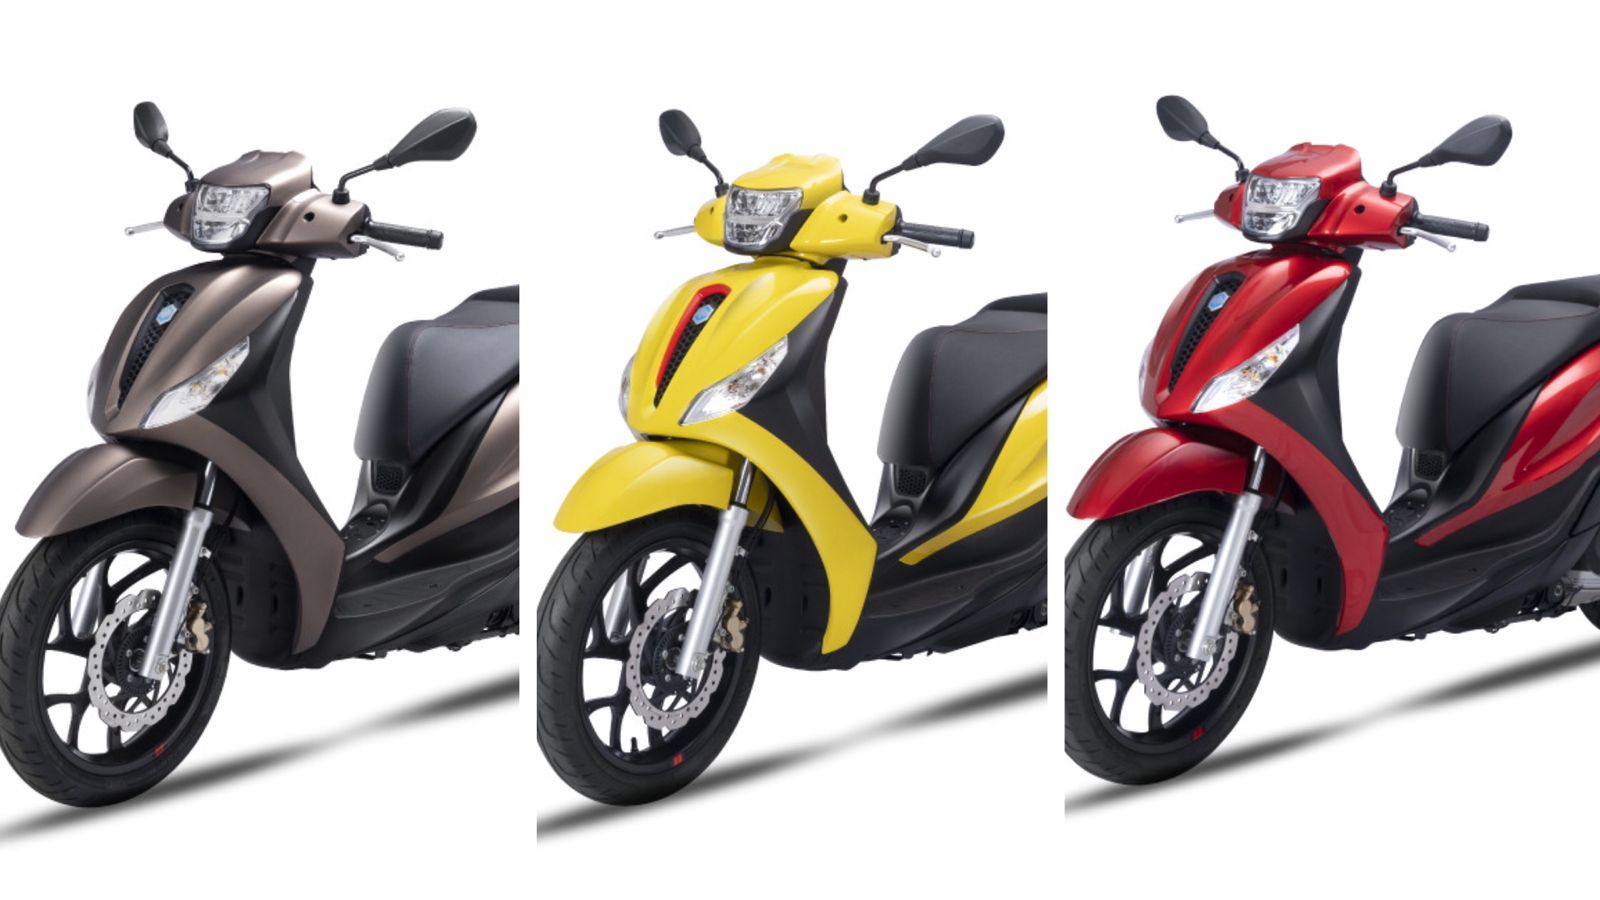 Piaggio Medley S with 3 New Colors Released, The Price Is So This!